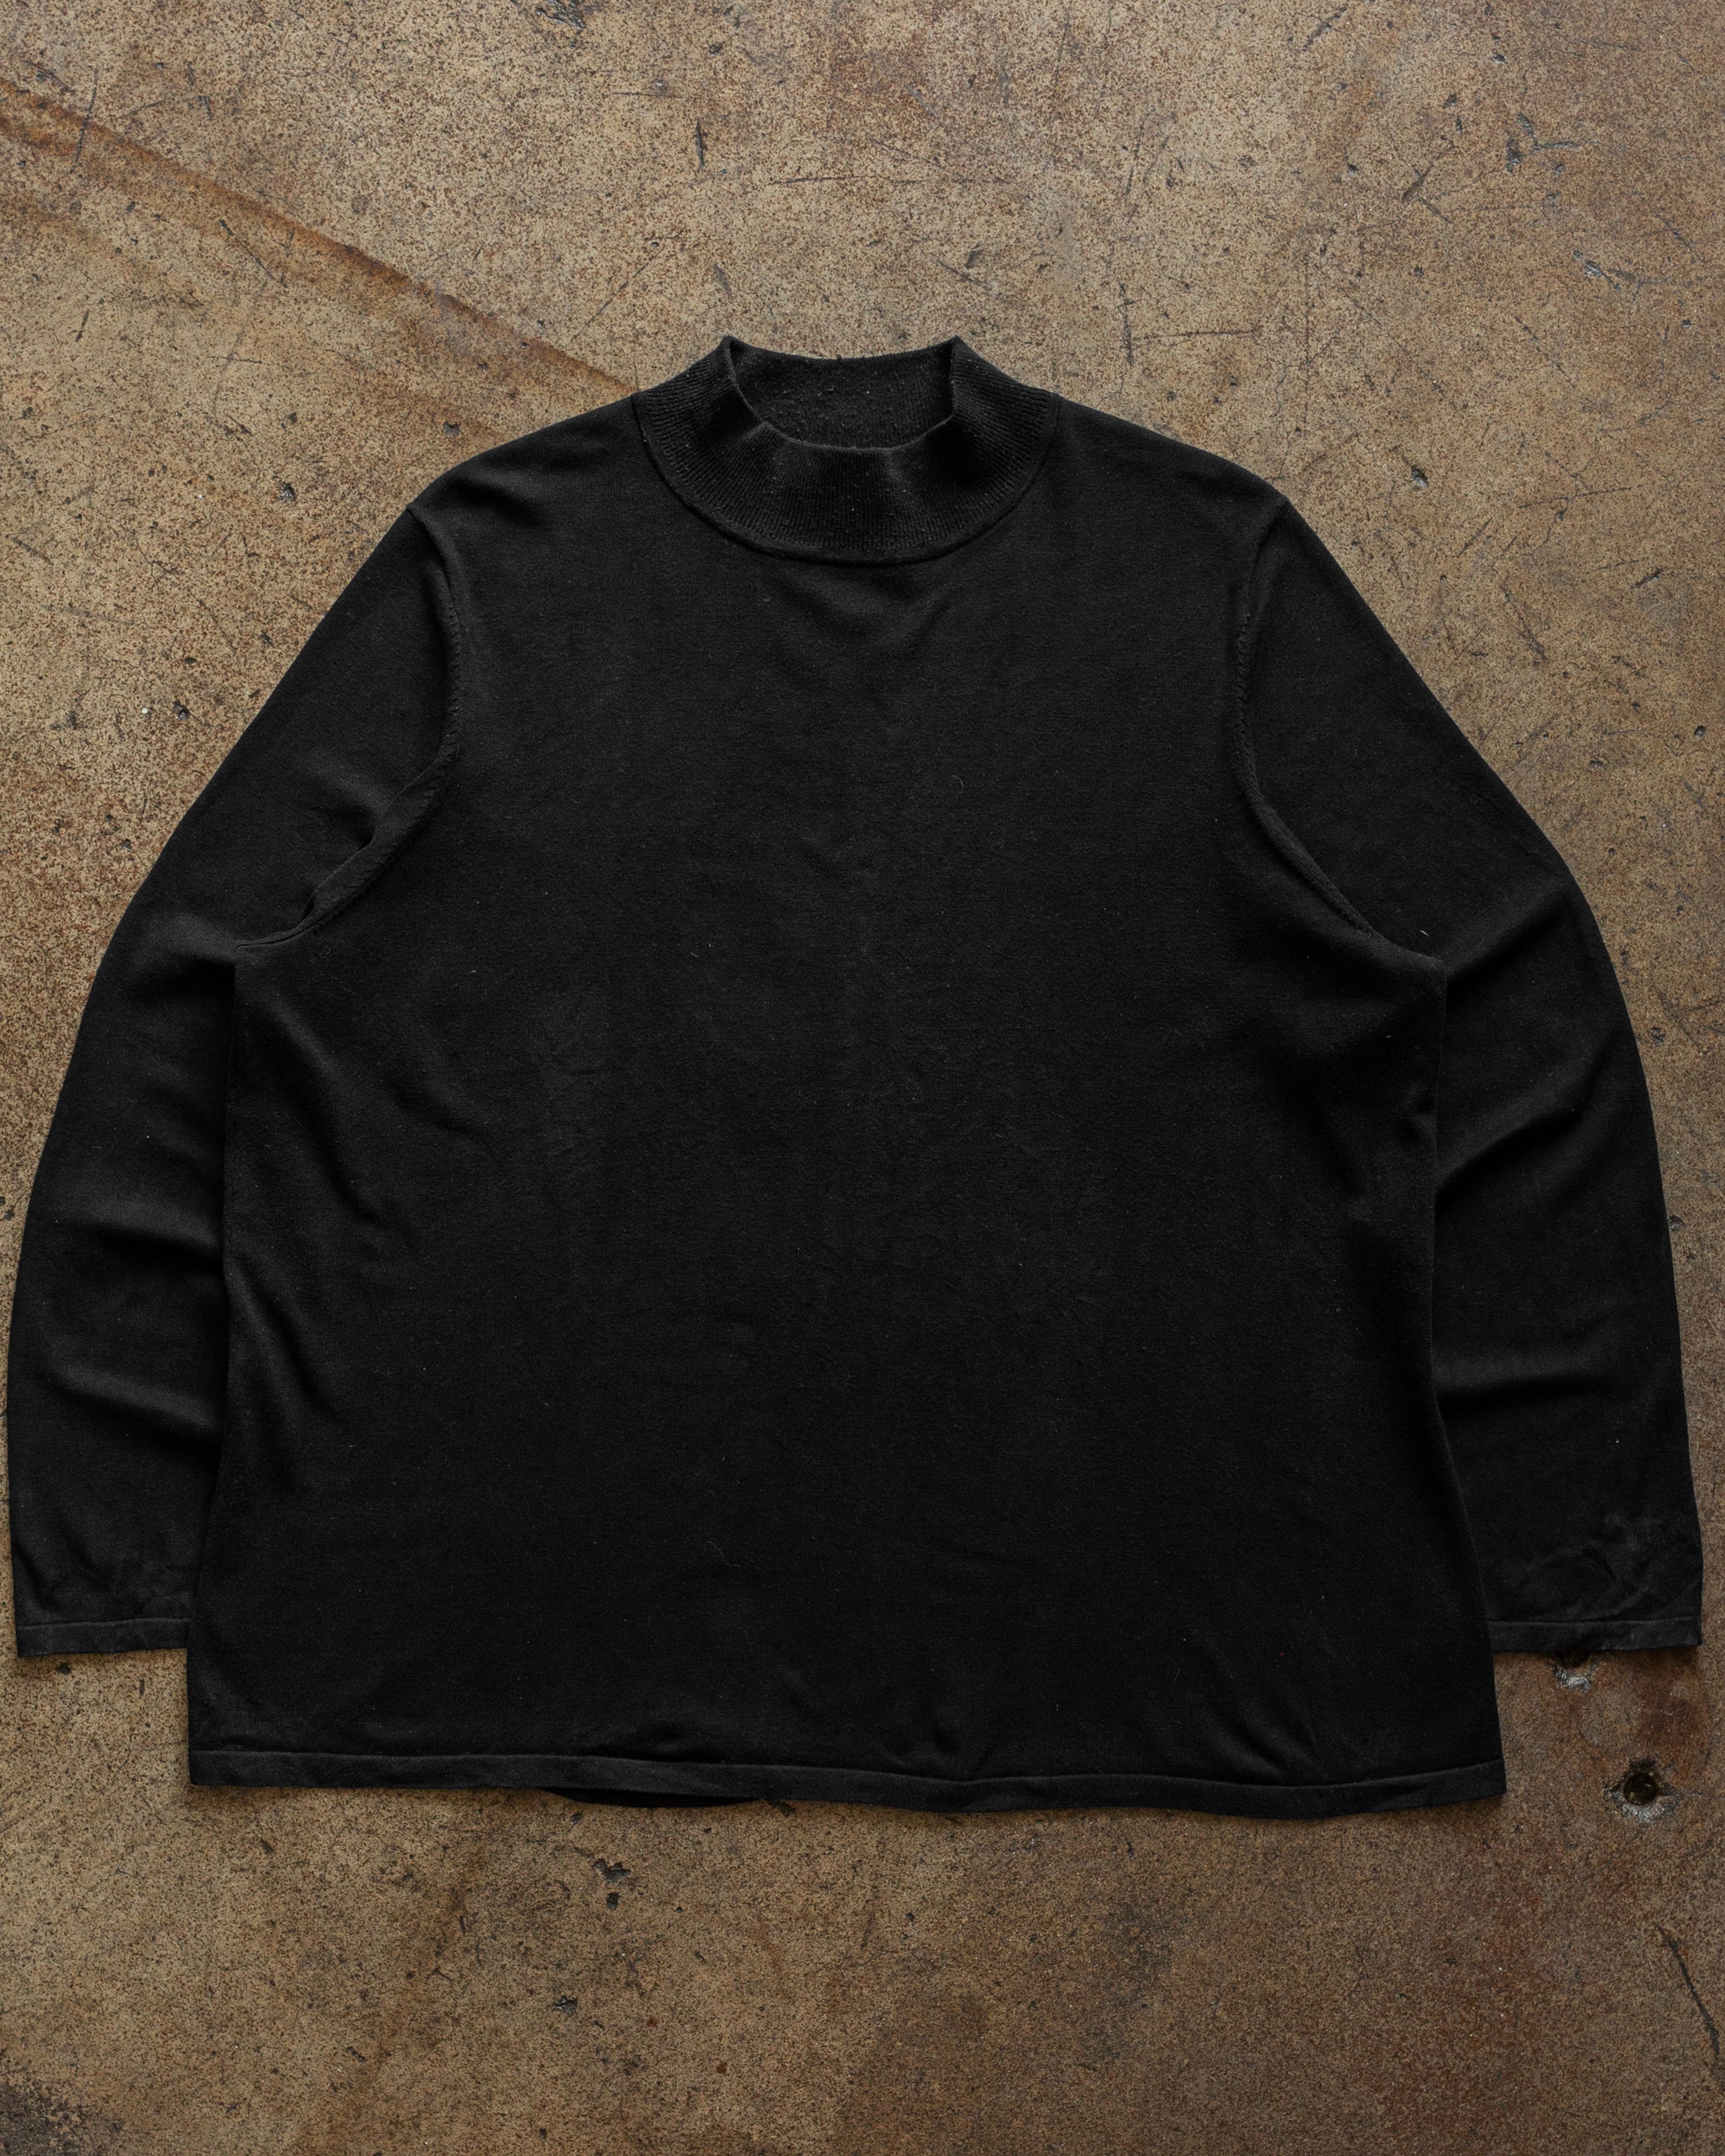 Faded Black Blank Mock Neck Shirt - 1990s – UNSOUND RAGS